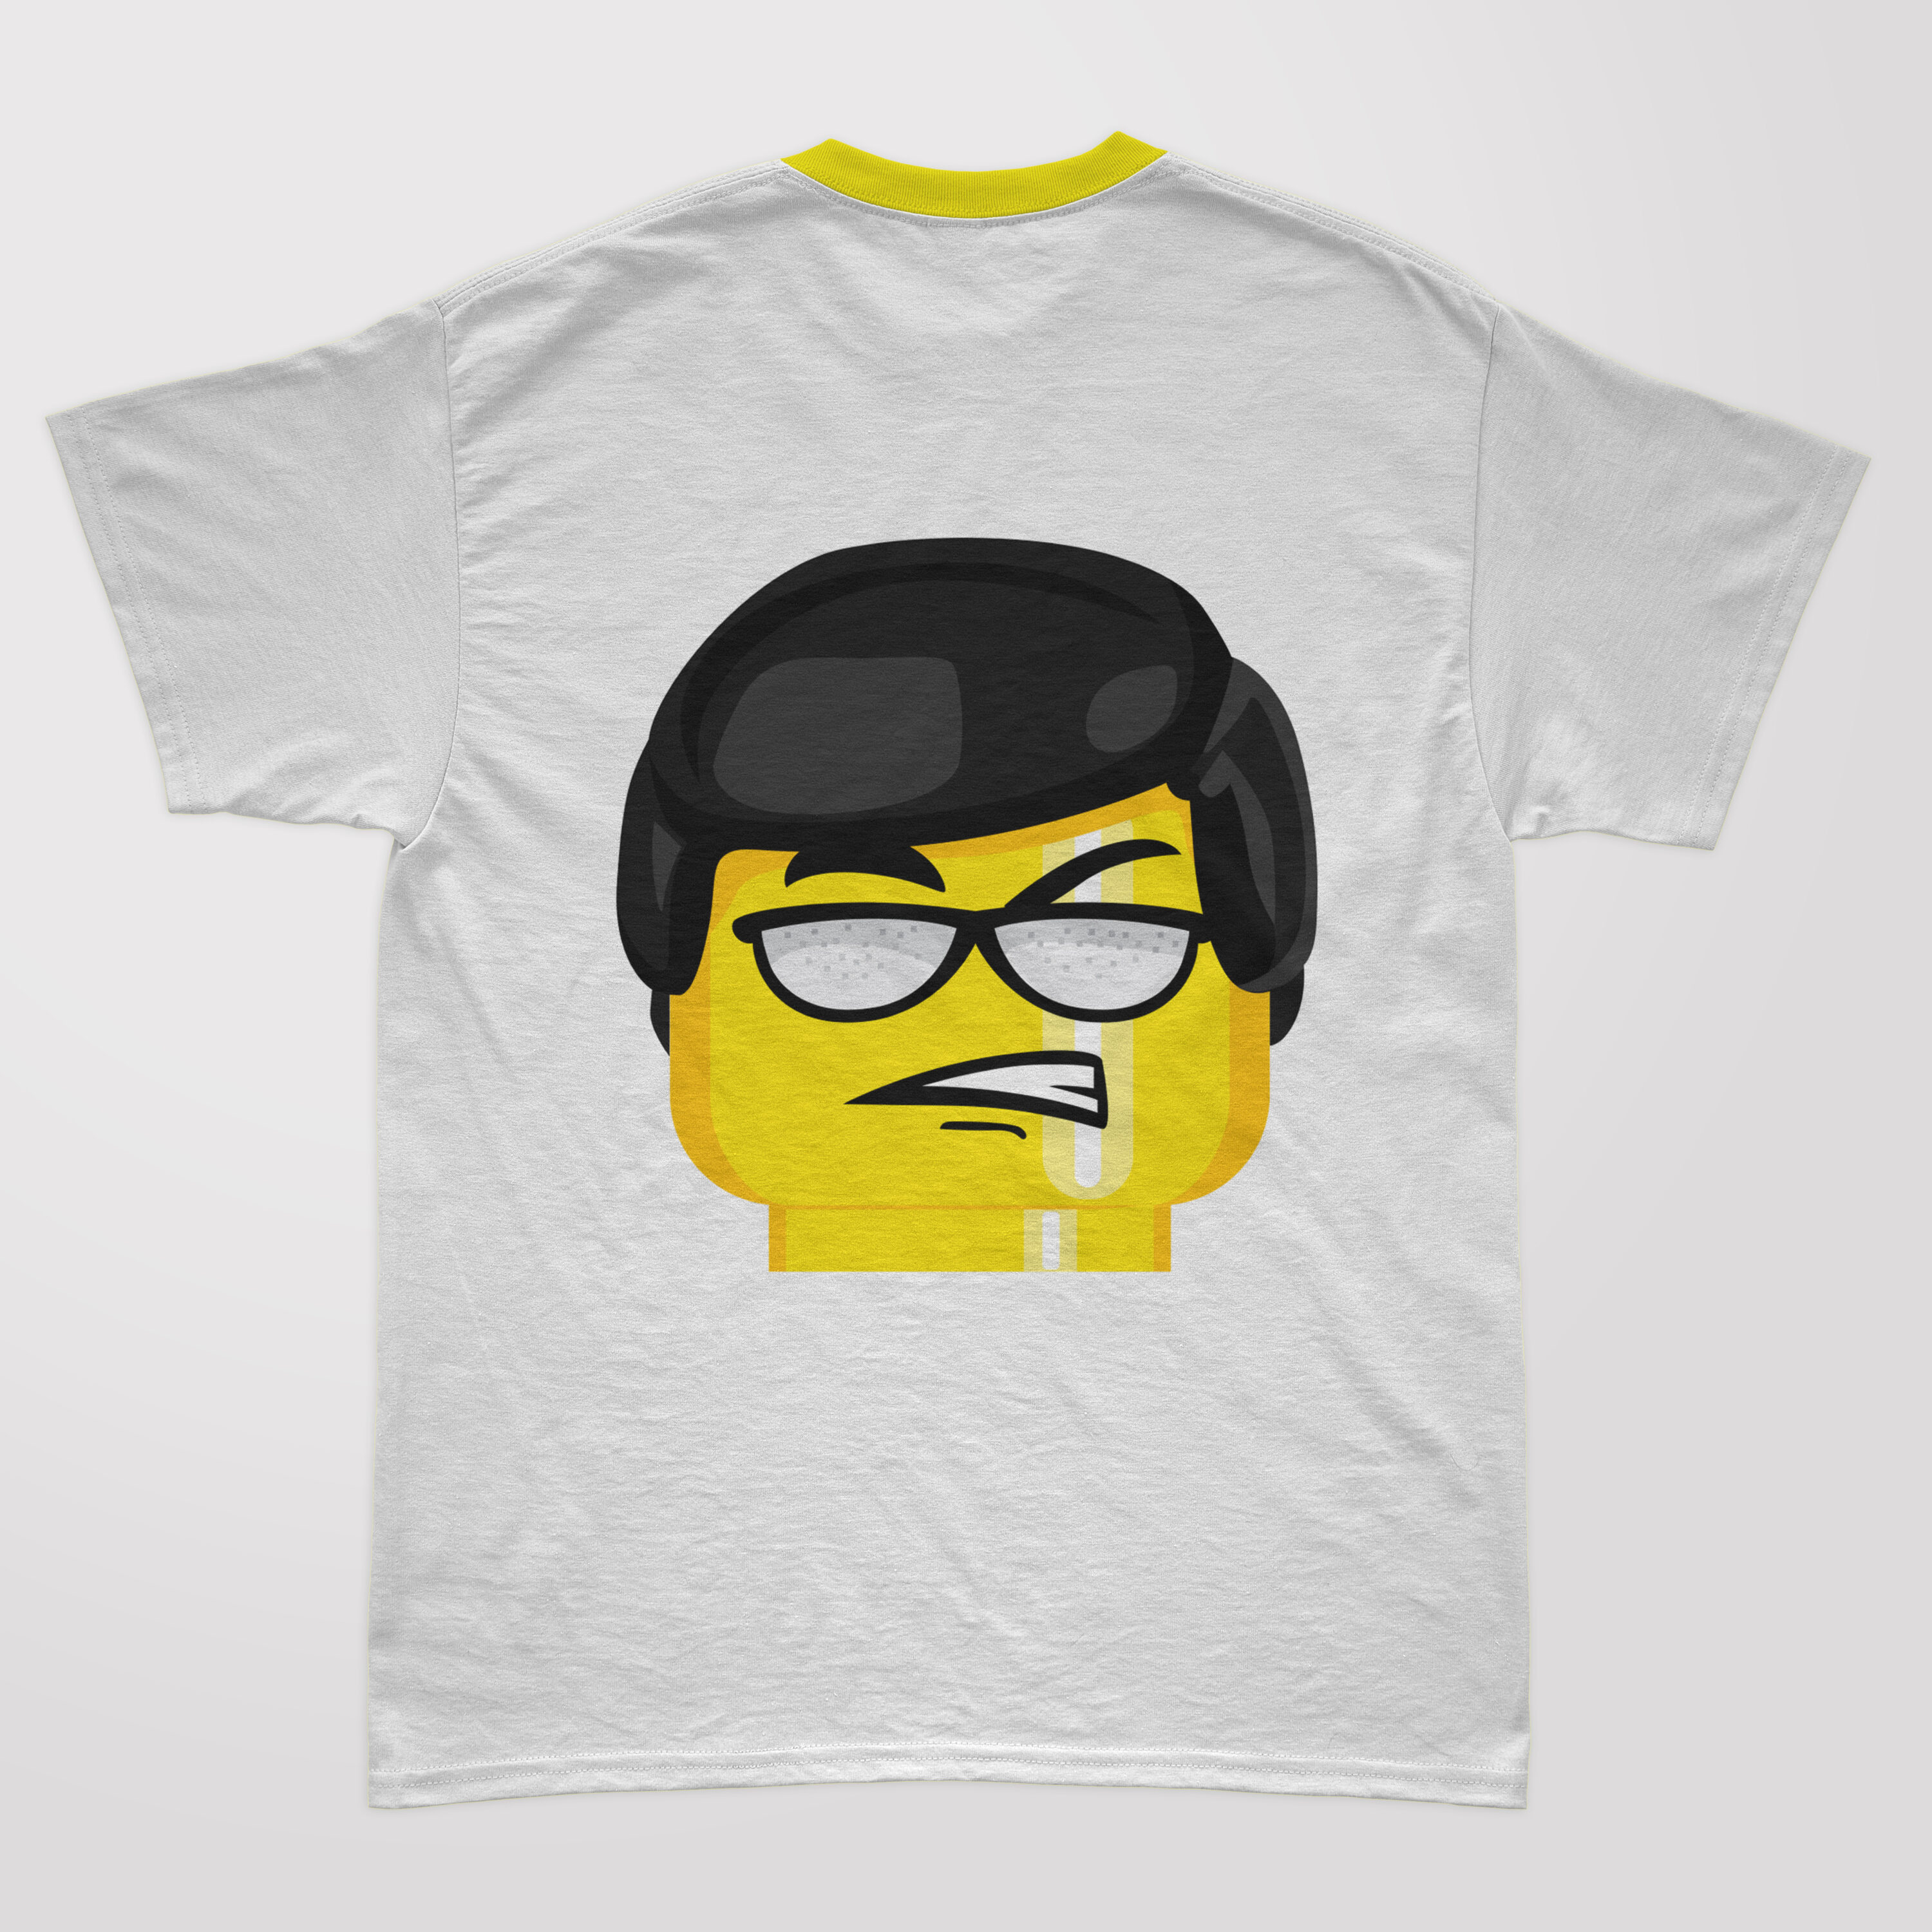 Awesome lego character wearing glasses on a t-shirt.